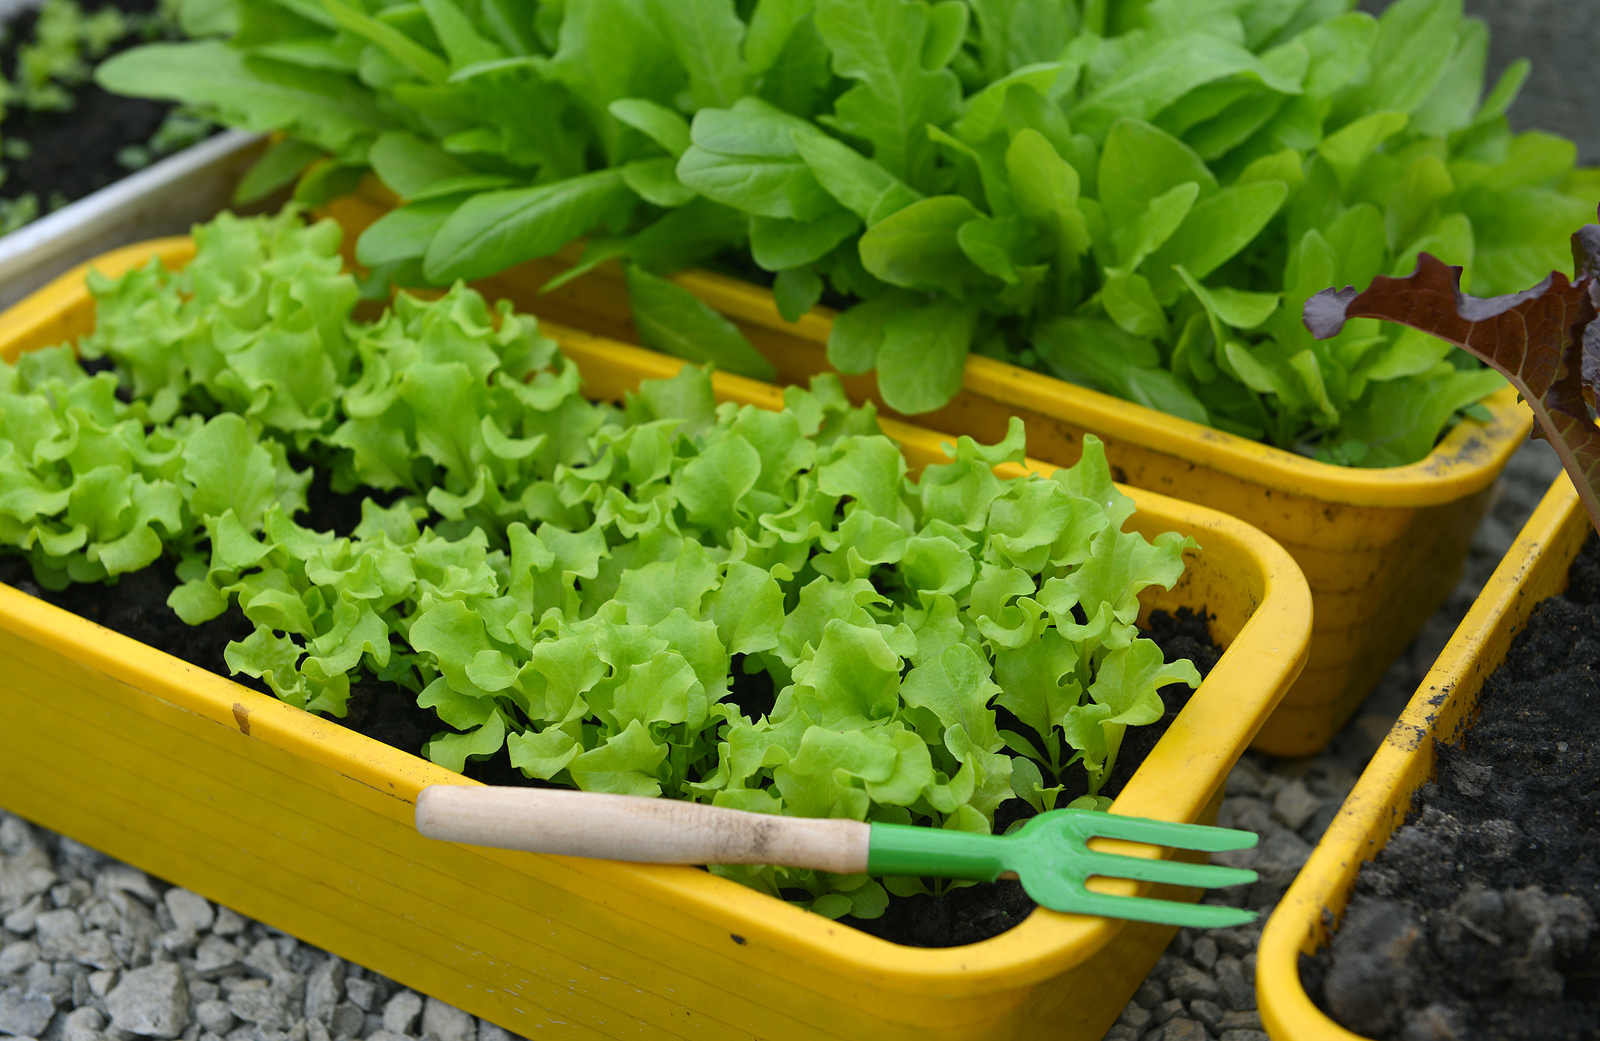 https://harvesttotable.com/wp-content/uploads/2022/01/Lettuce-container-bigstock-Close-Up-Of-Boxes-With-Young-L-403802927.jpg